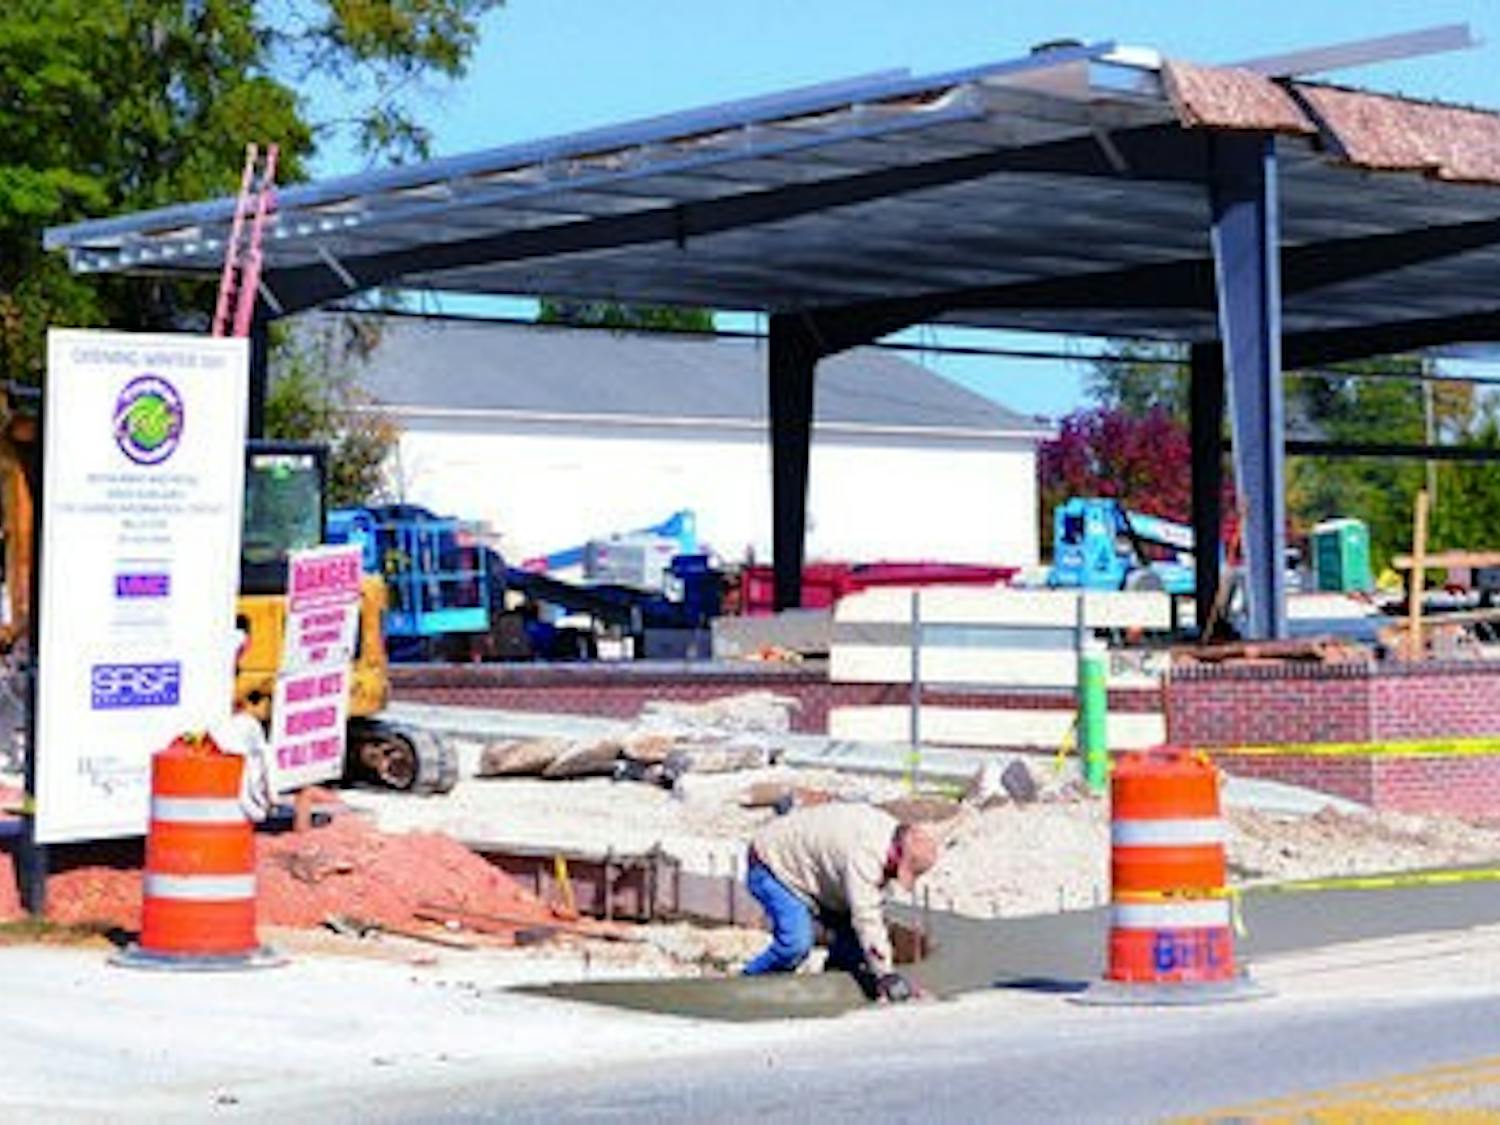 Downtown construction will culminate in two new restaurants this winter: Tropical Smoothie (above) on West Glenn Avenue and Chipotle Mexican Grill on West Magnolia Avenue. (Christen Harned / ASSISTANT PHOTO EDITOR)